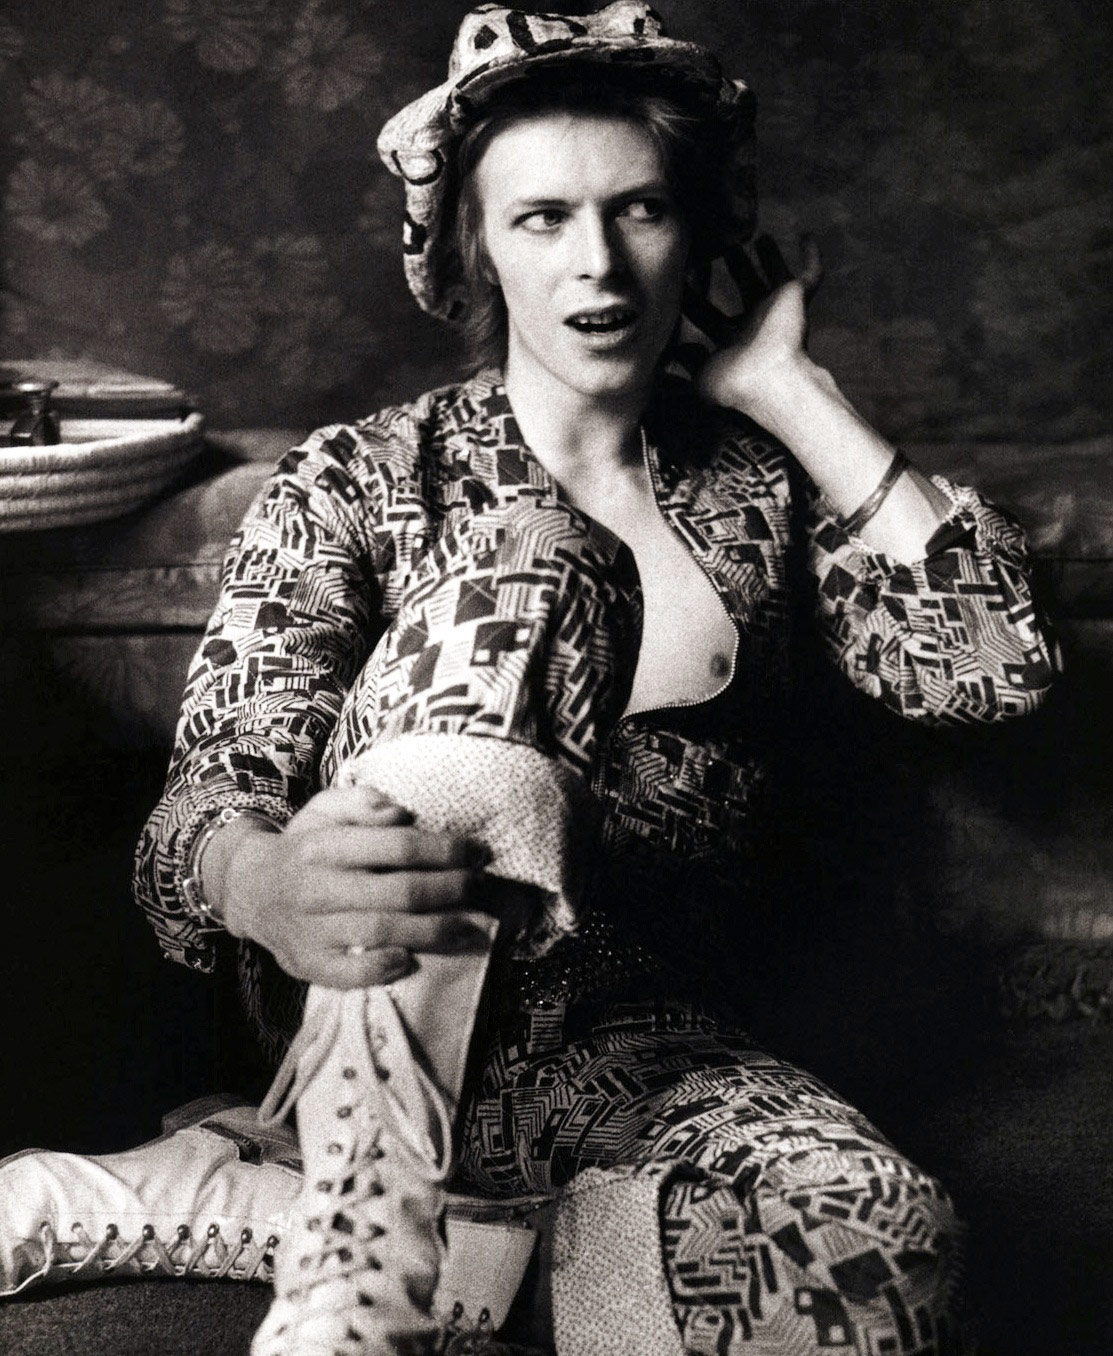 Bowie before Ziggy